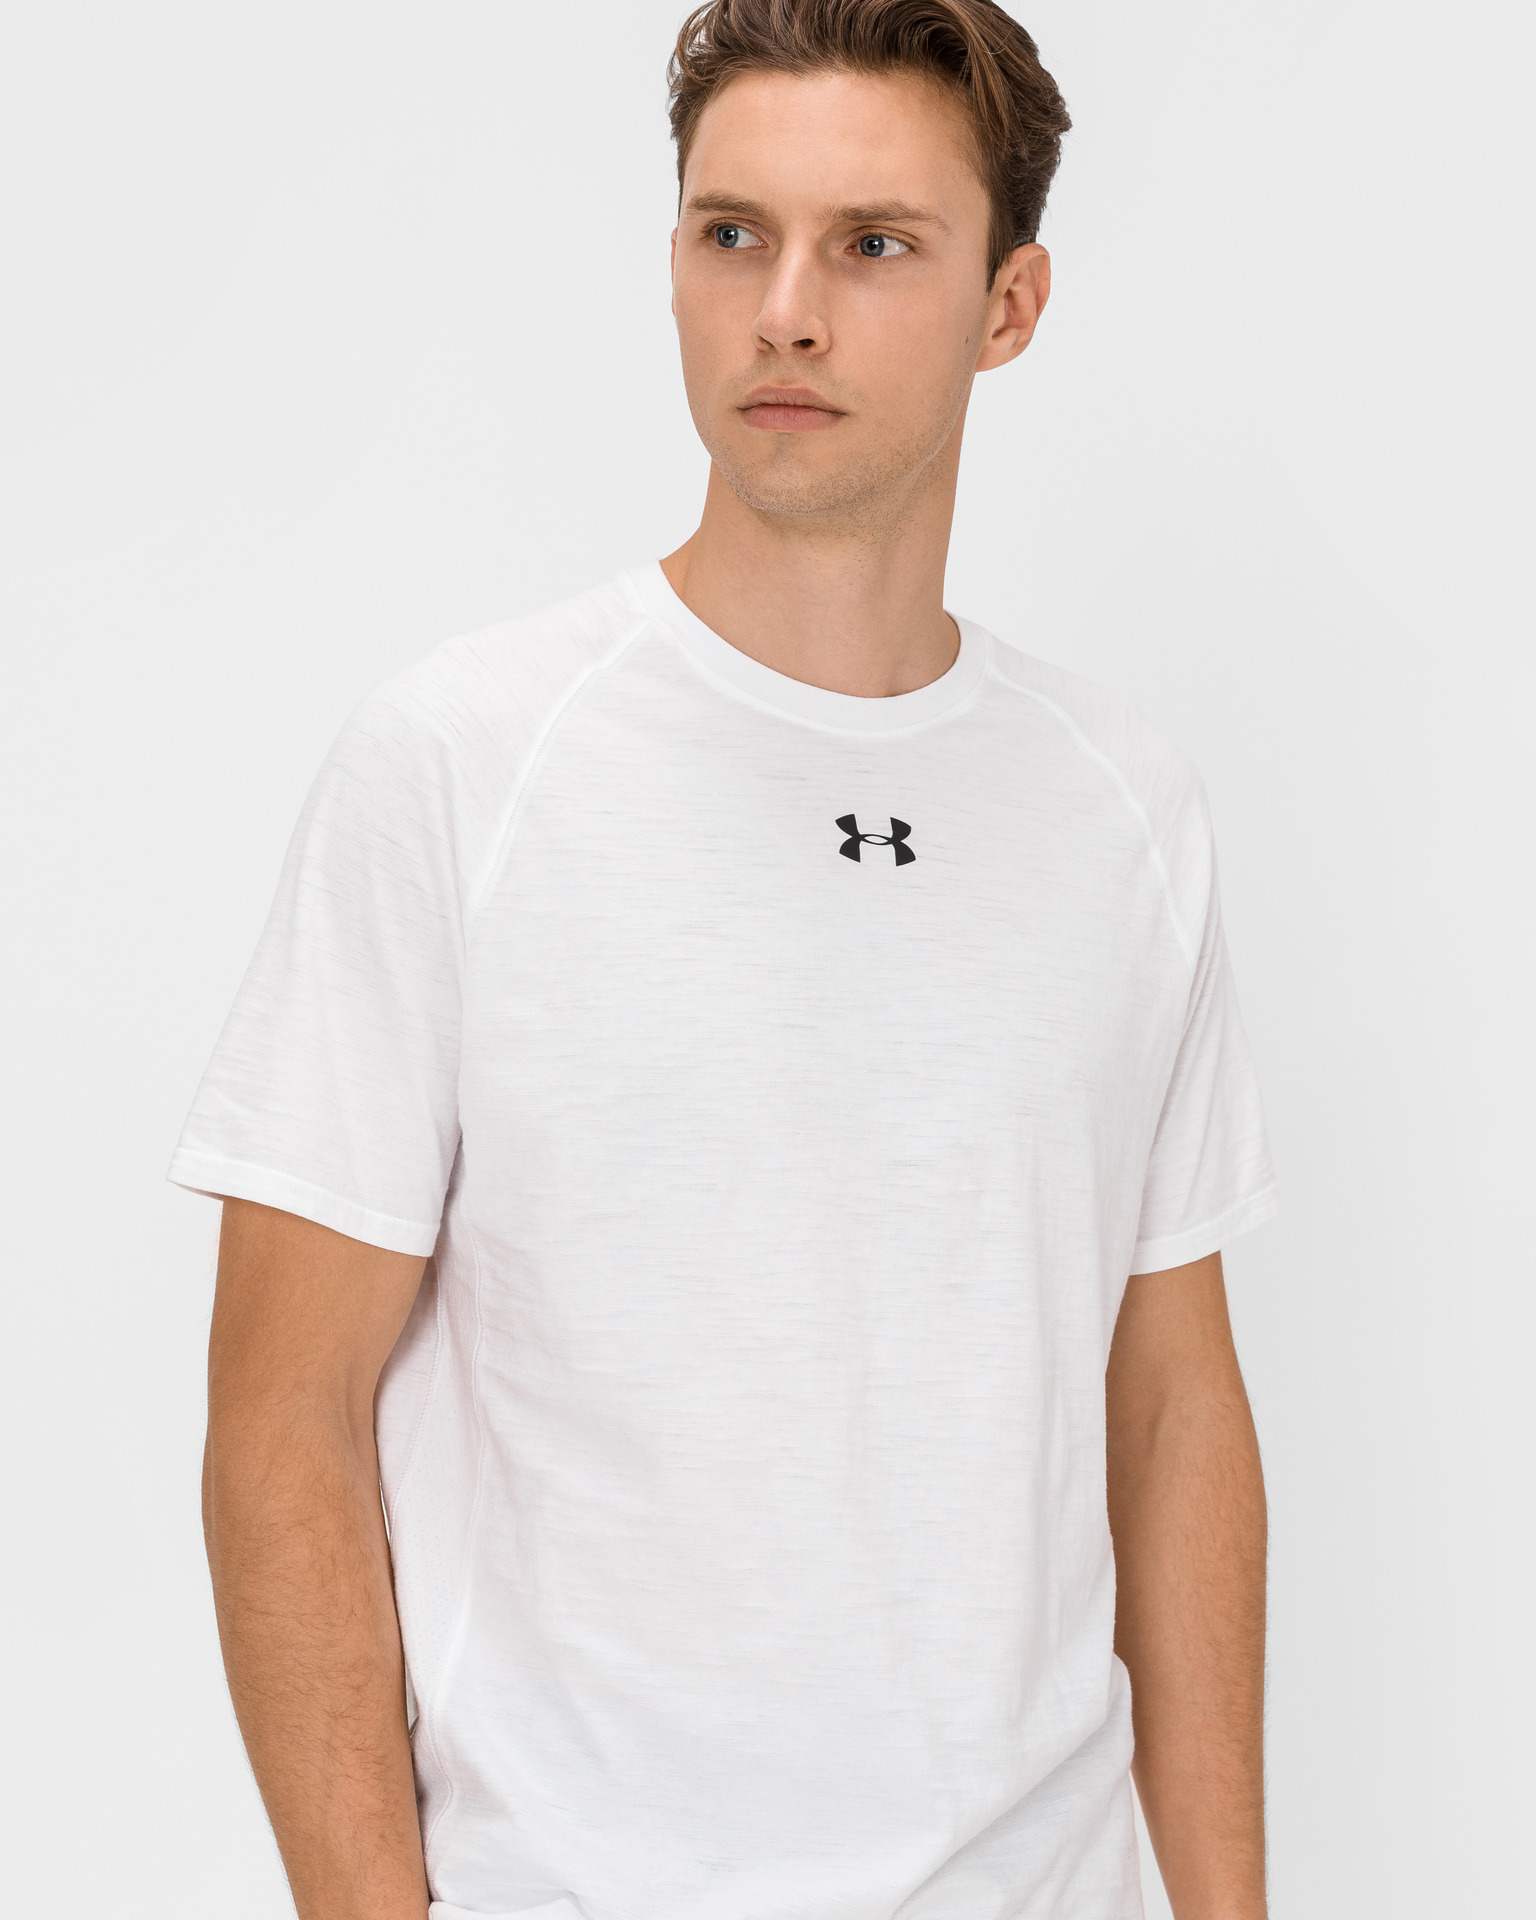 Under Armour - Charged Cotton® T-shirt